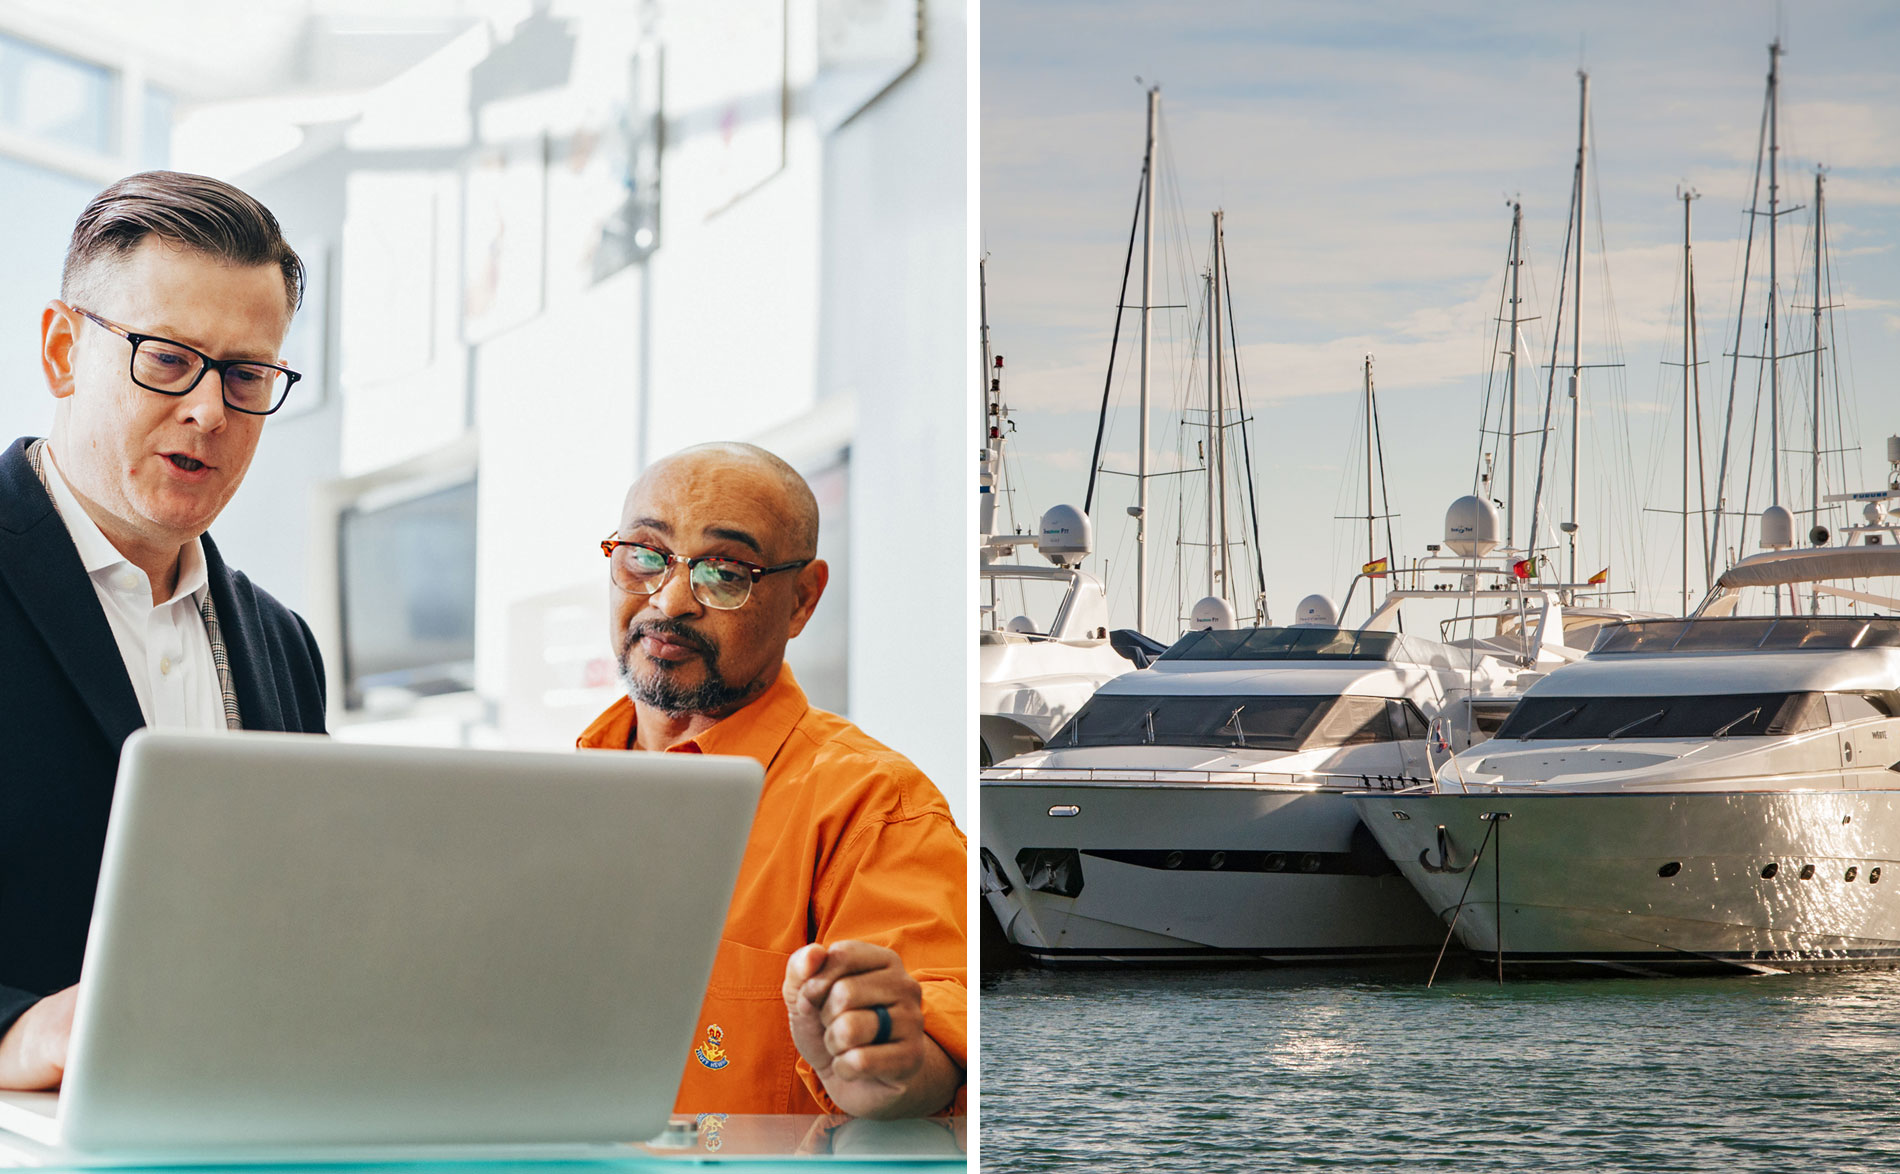 Working with boat dealers and yacht brokers